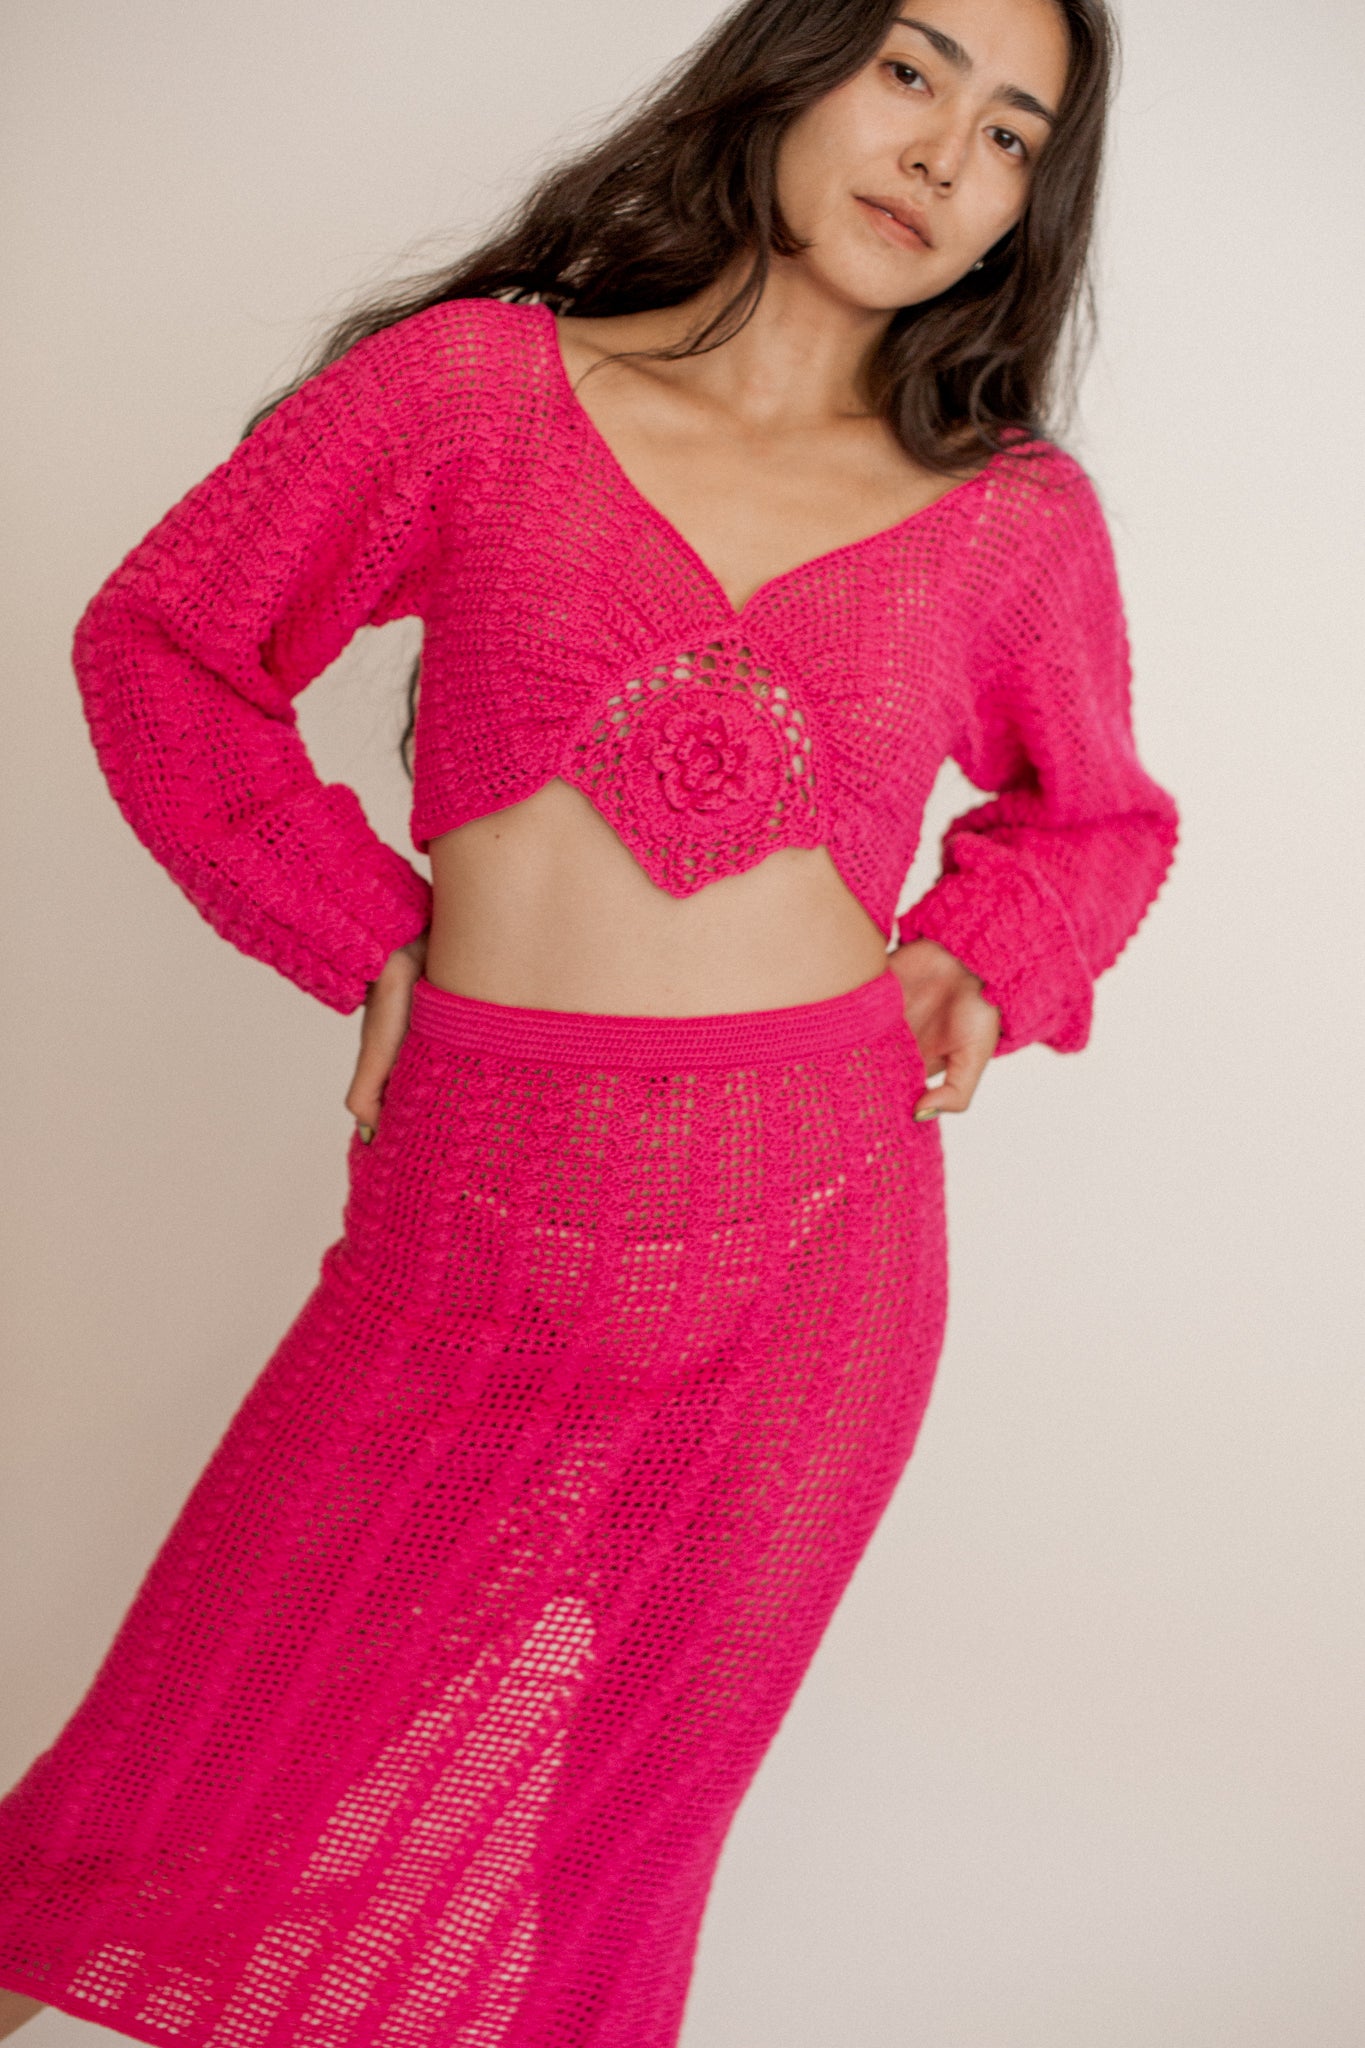 Mozh Mozh Shiraz Top in Pink